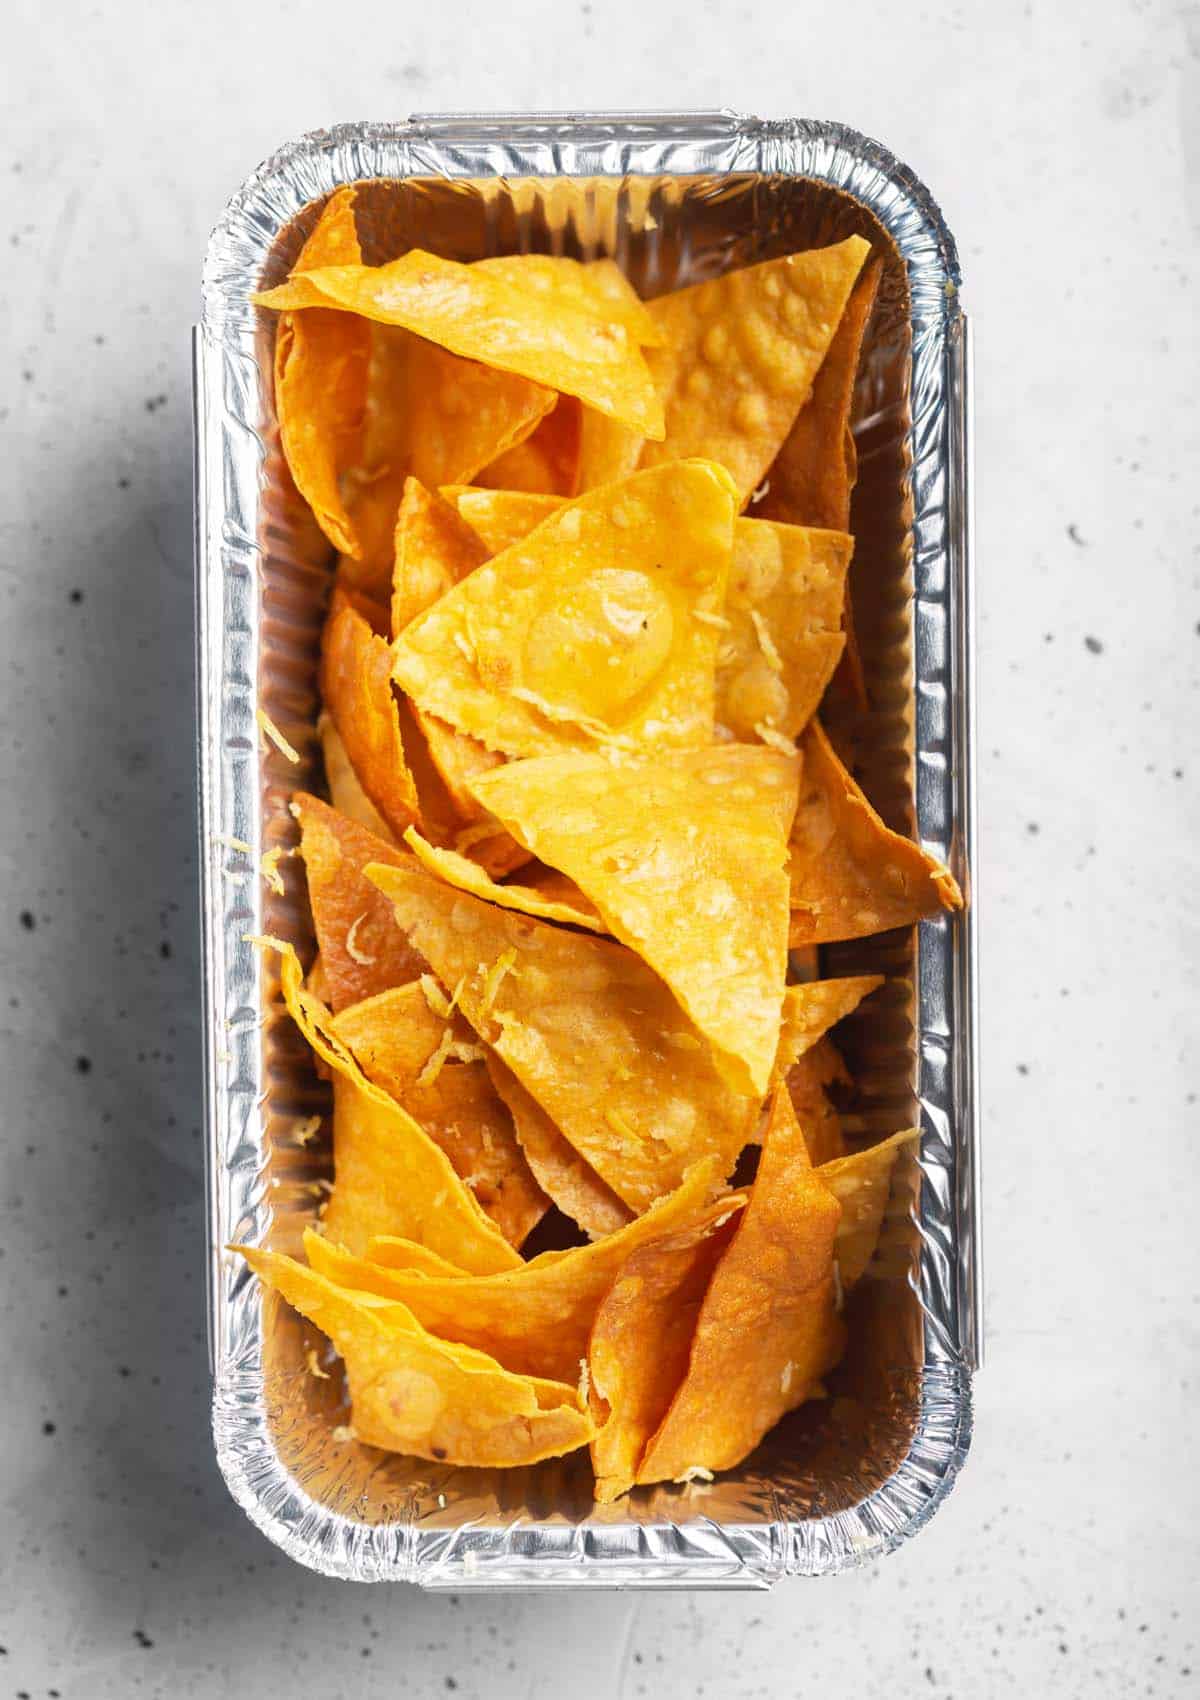 How to take your snack game to the next level? Believe it or not, heating up tortilla chips can be a game-changer. You don't have to settle for opening a new bag when your old chips are stale and soggy. The best way to heat up tortilla chips is in the oven.